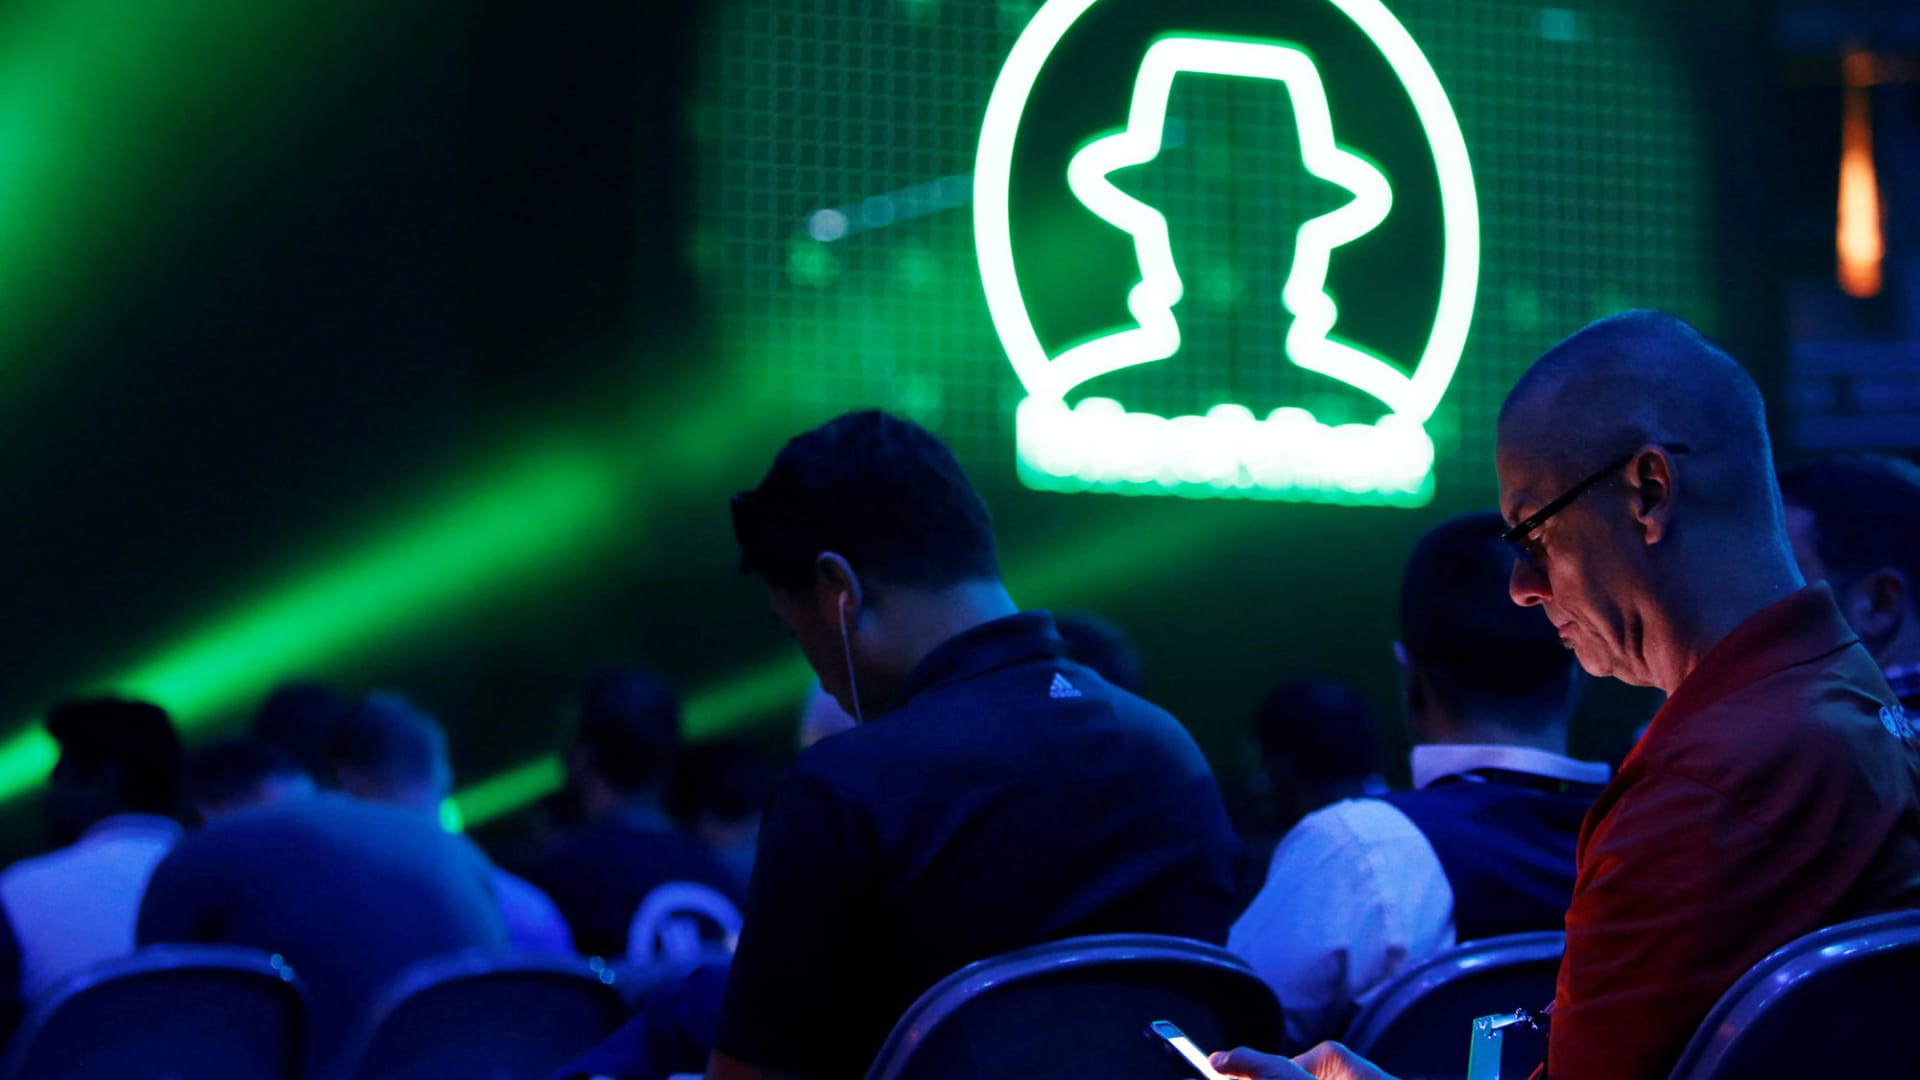 At Black Hat Conference, good guy hackers have a bleak view of US cybersecurity